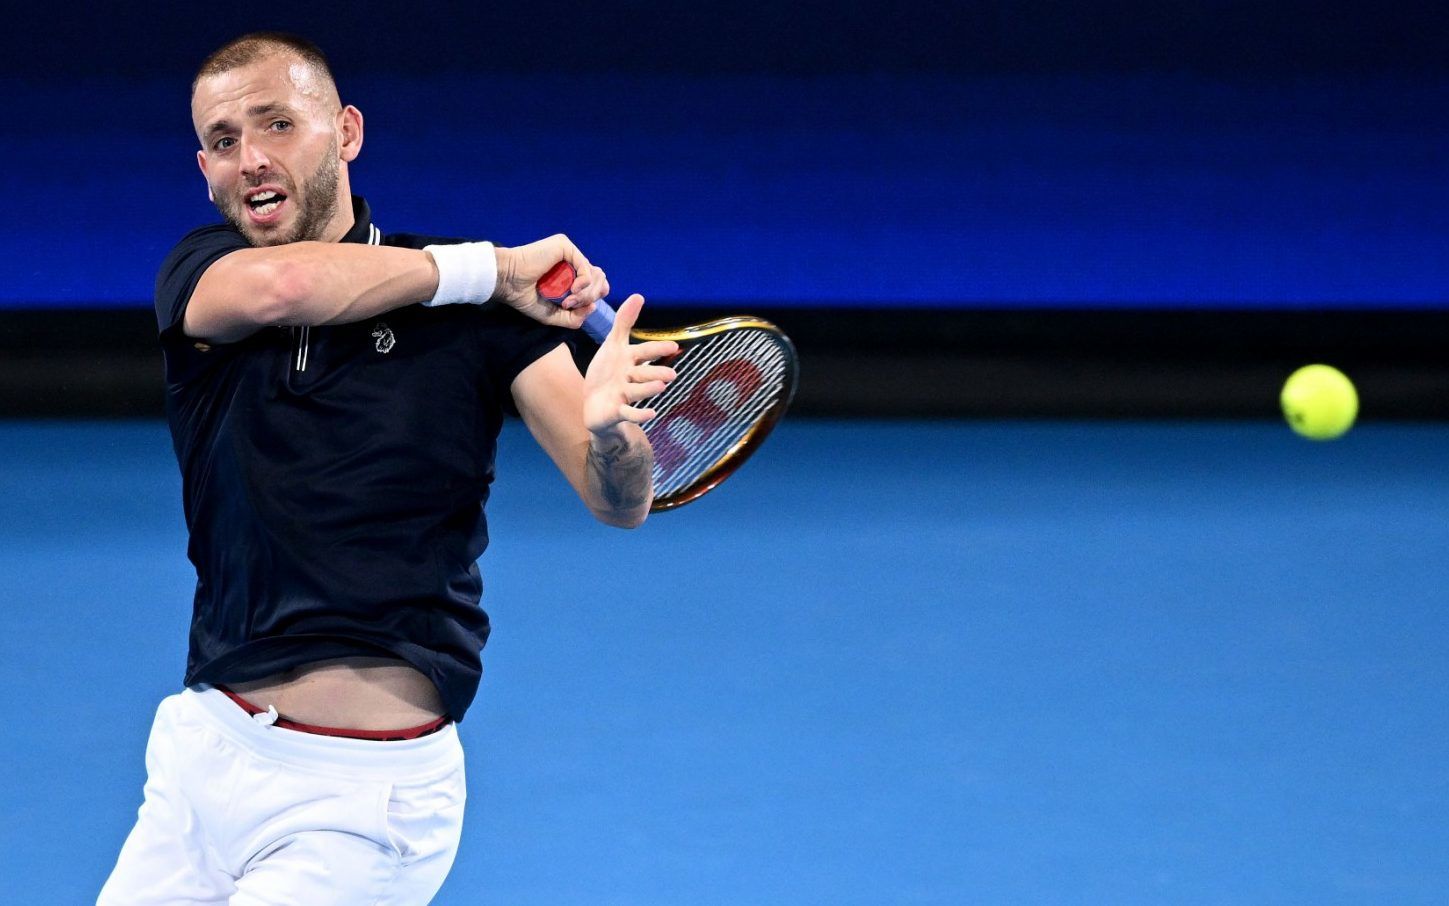 Andrey Rublev vs Dan Evans Prediction, Betting Tips and Odds │21 JANUARY, 2023